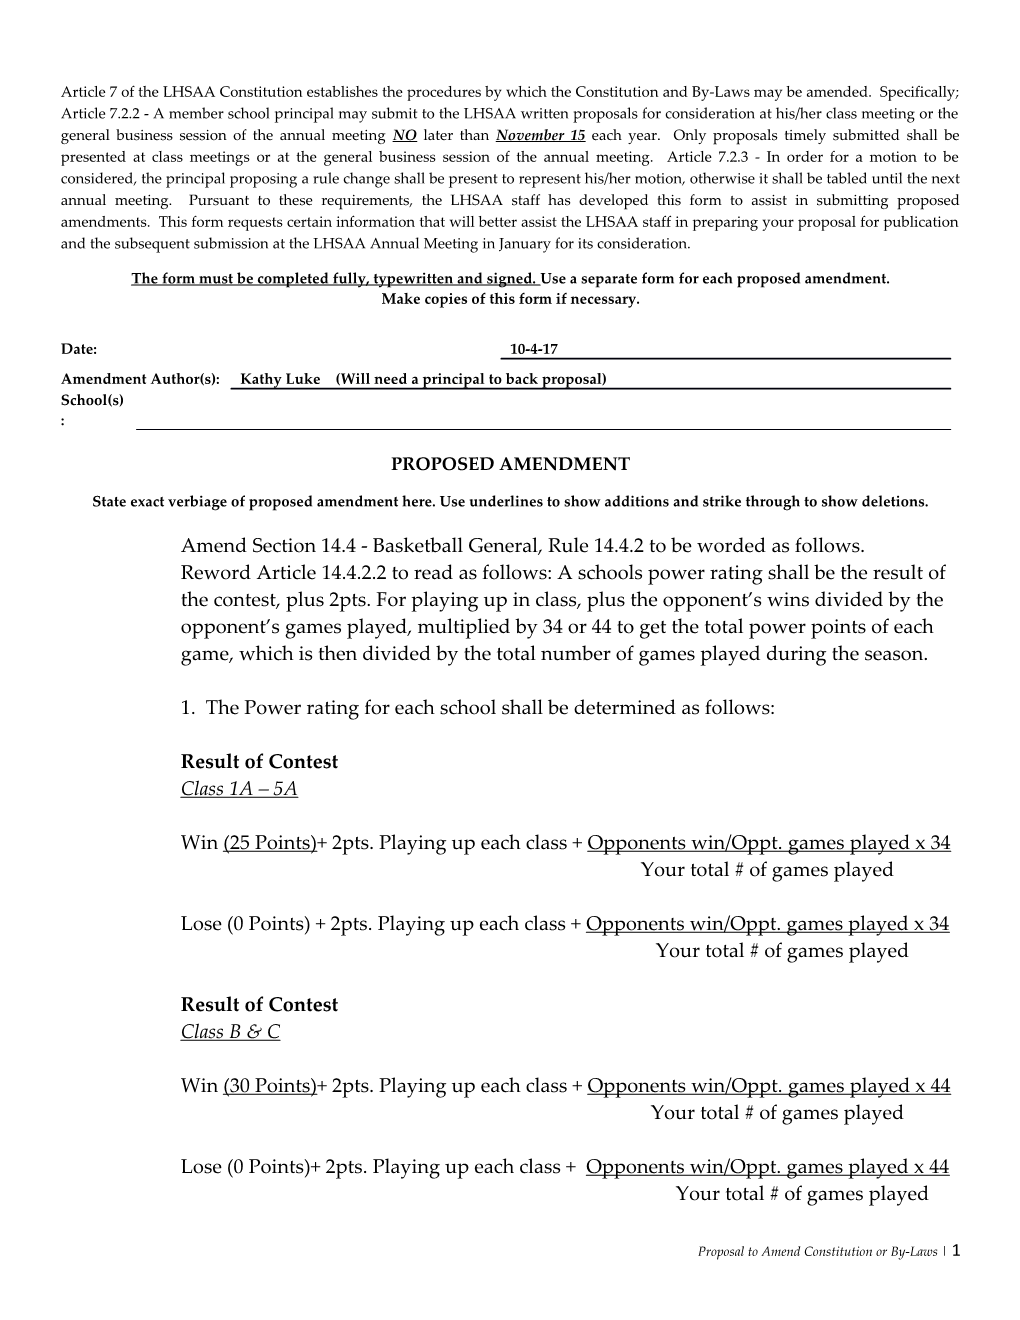 Make Copies of This Form If Necessary